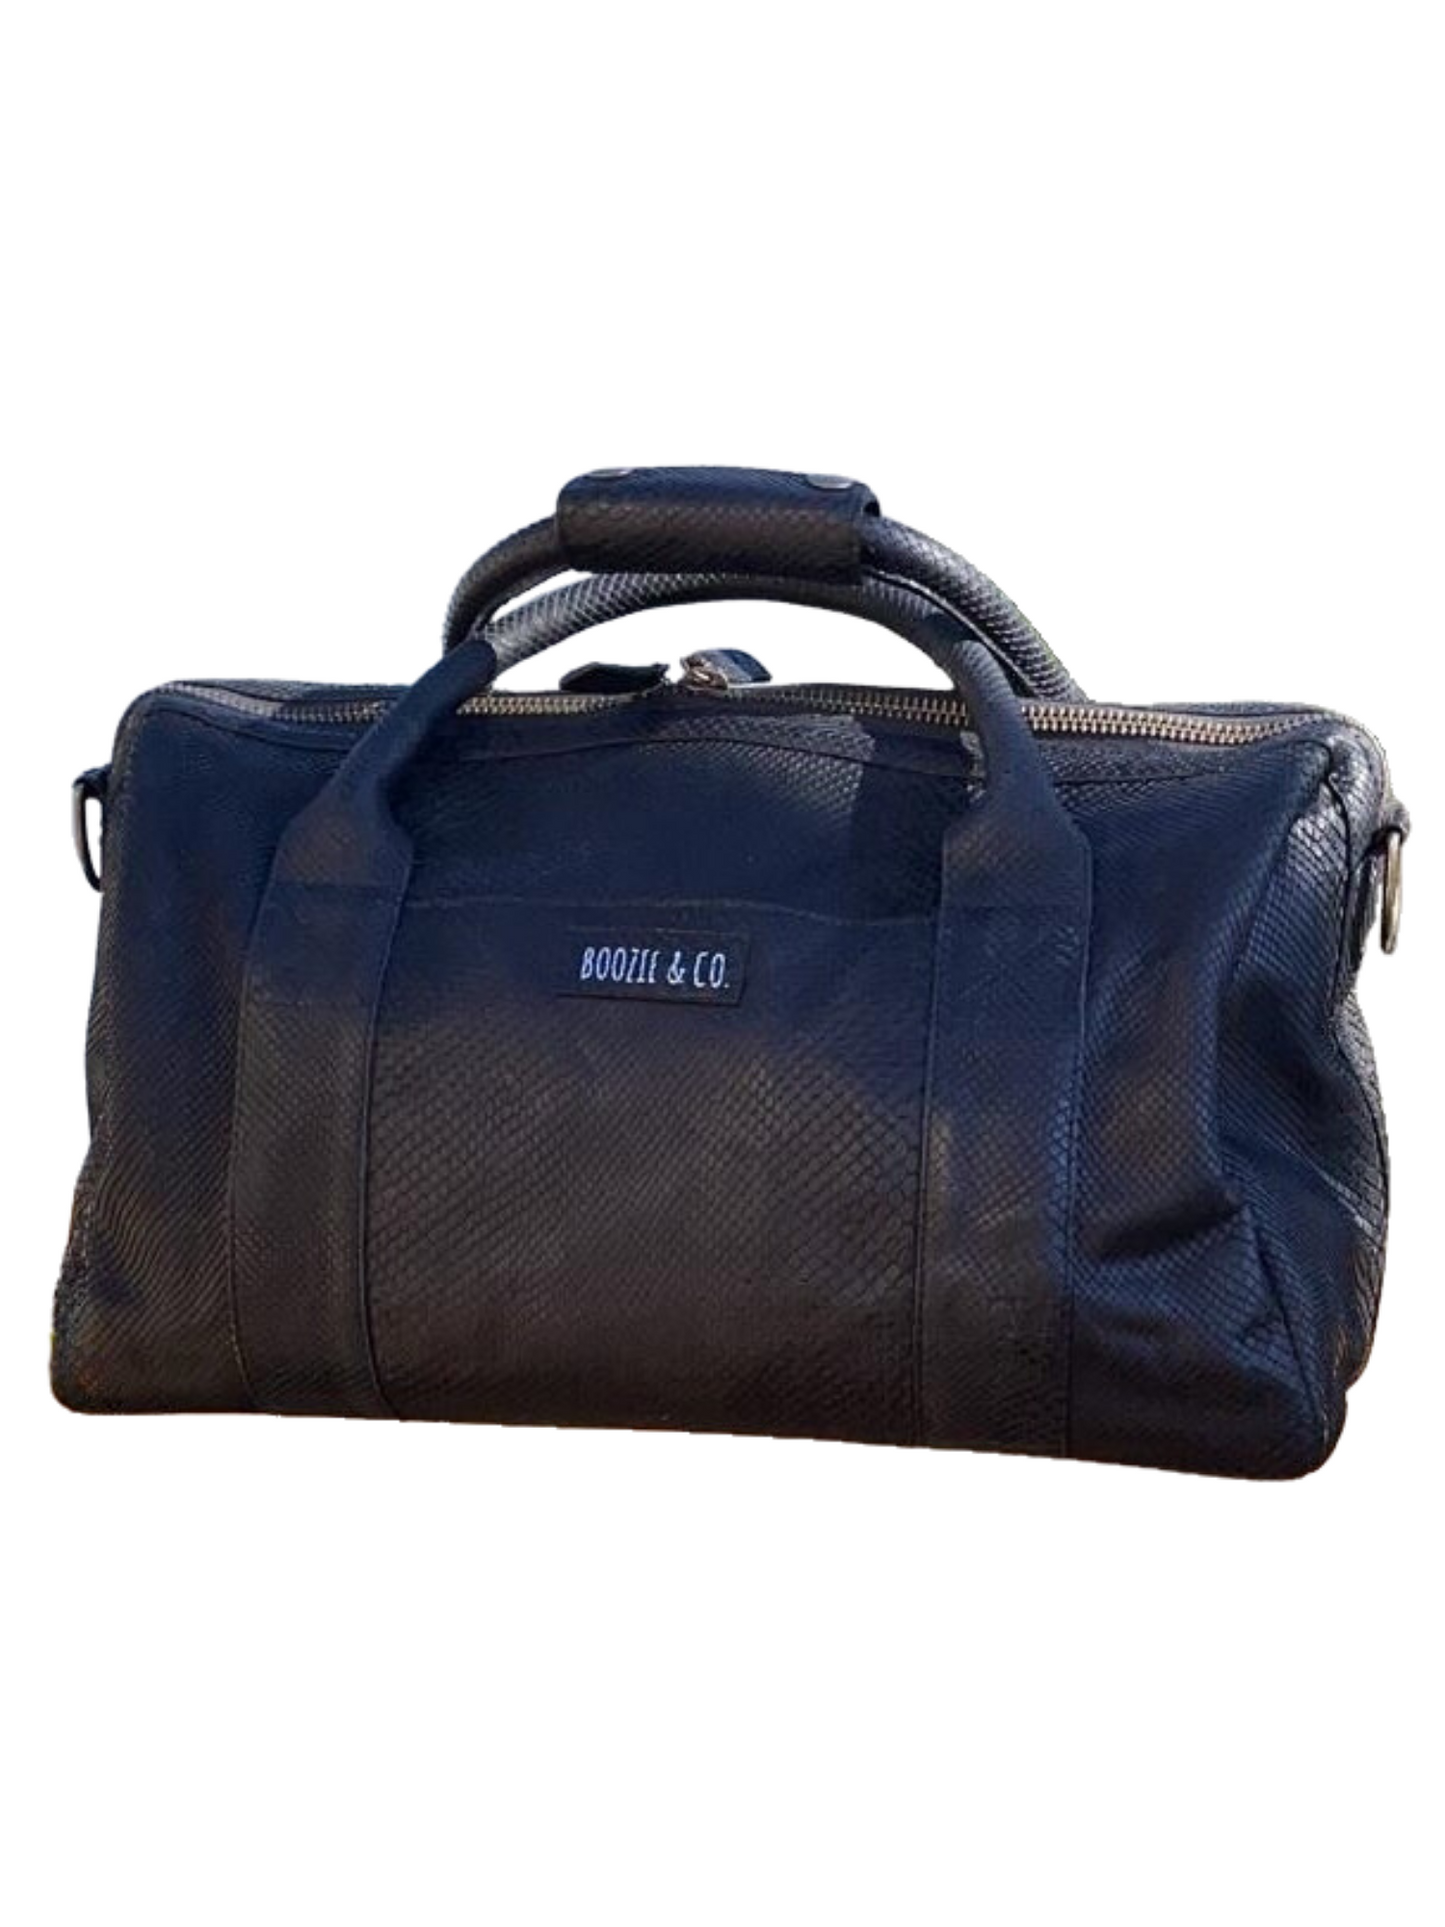 The Glades Duffle